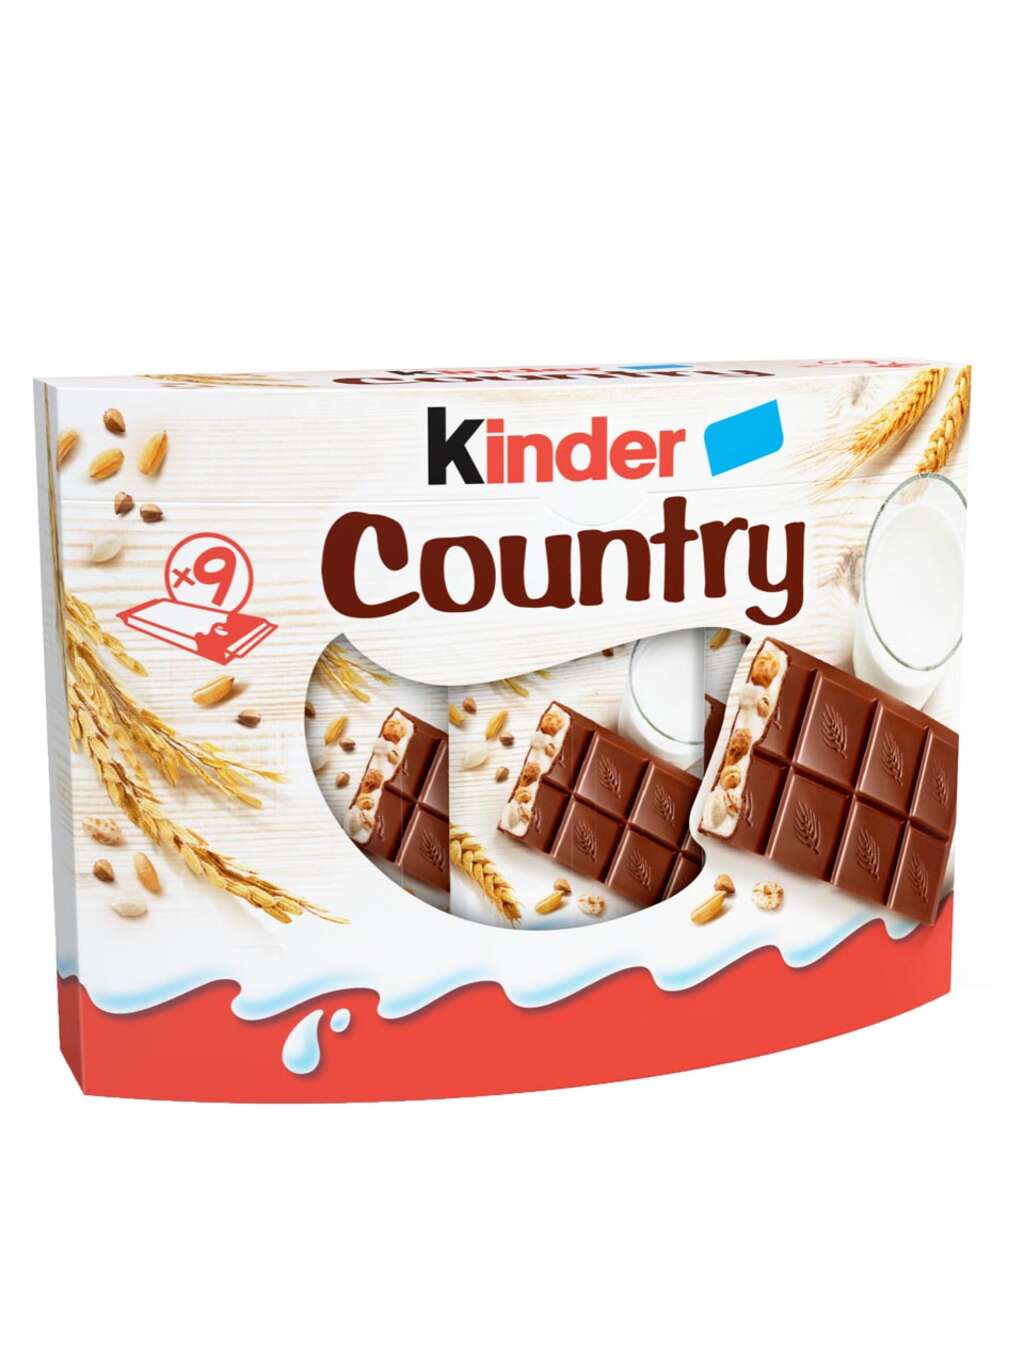 Kinder Country Chocolate